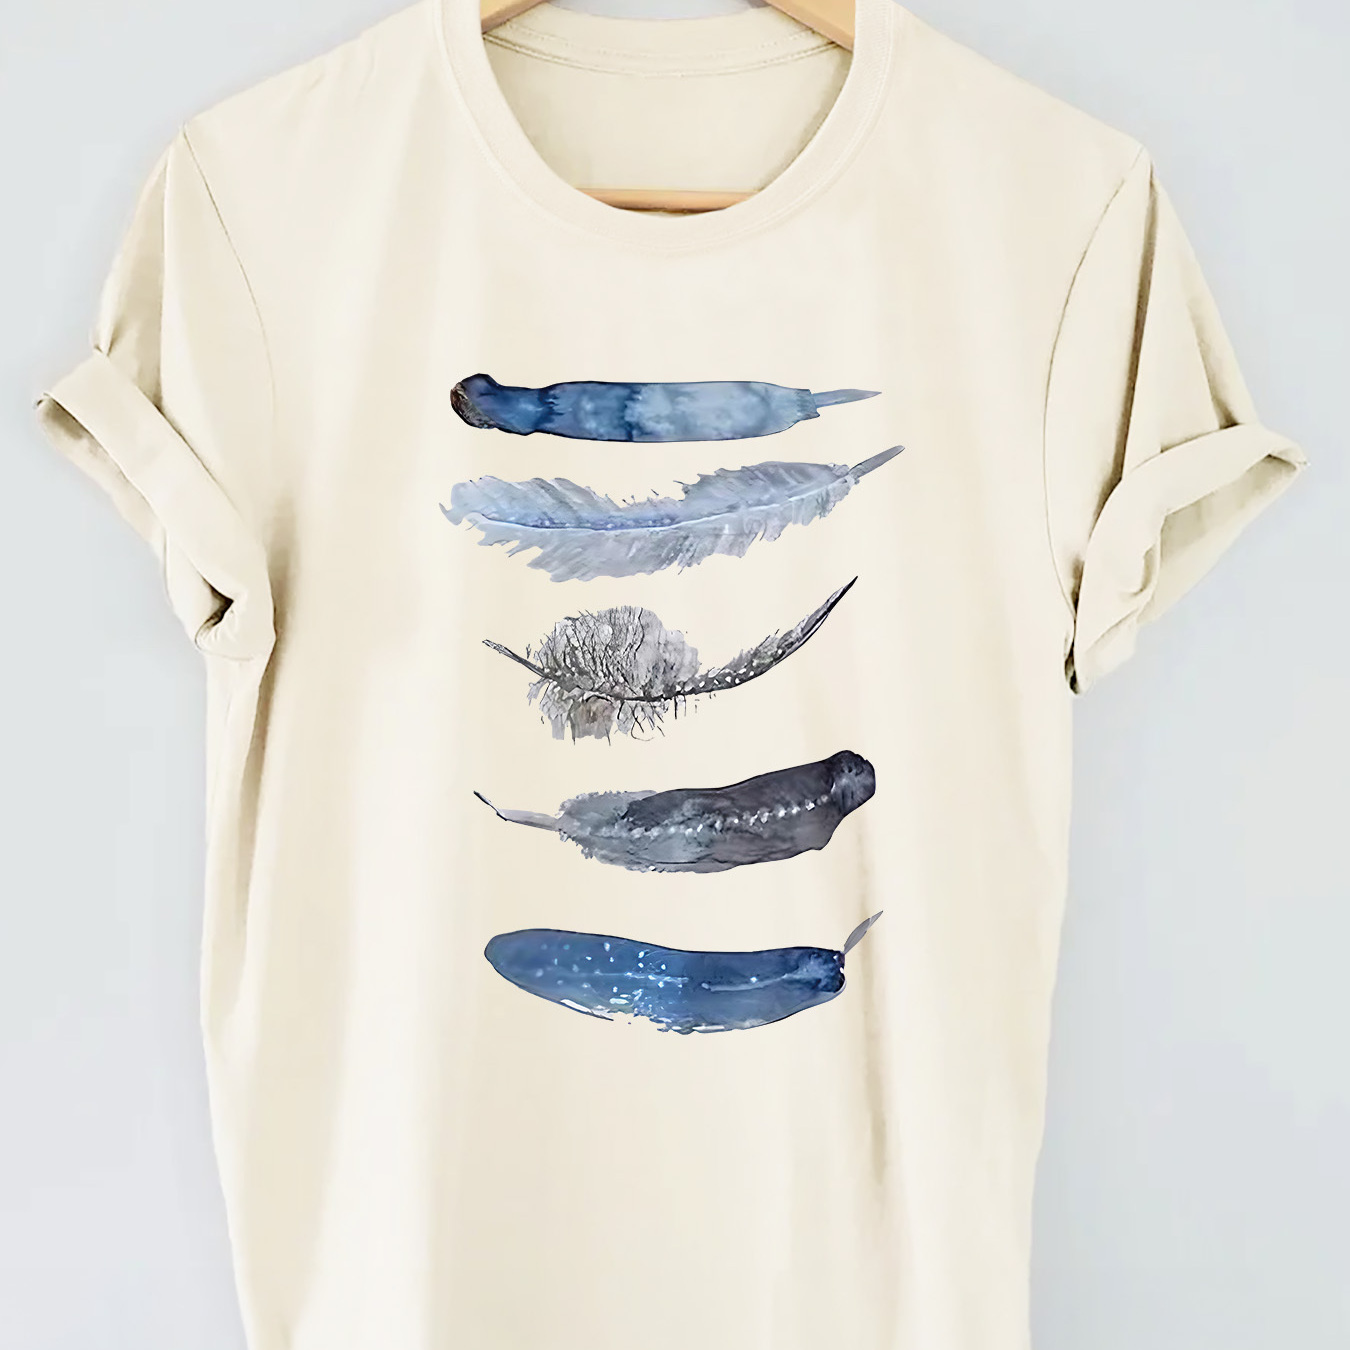 

Feathers Graphic Print Knitted T-shirt, Short Sleeve Crew Neck Casual Top For Summer & Spring, Women's Clothing